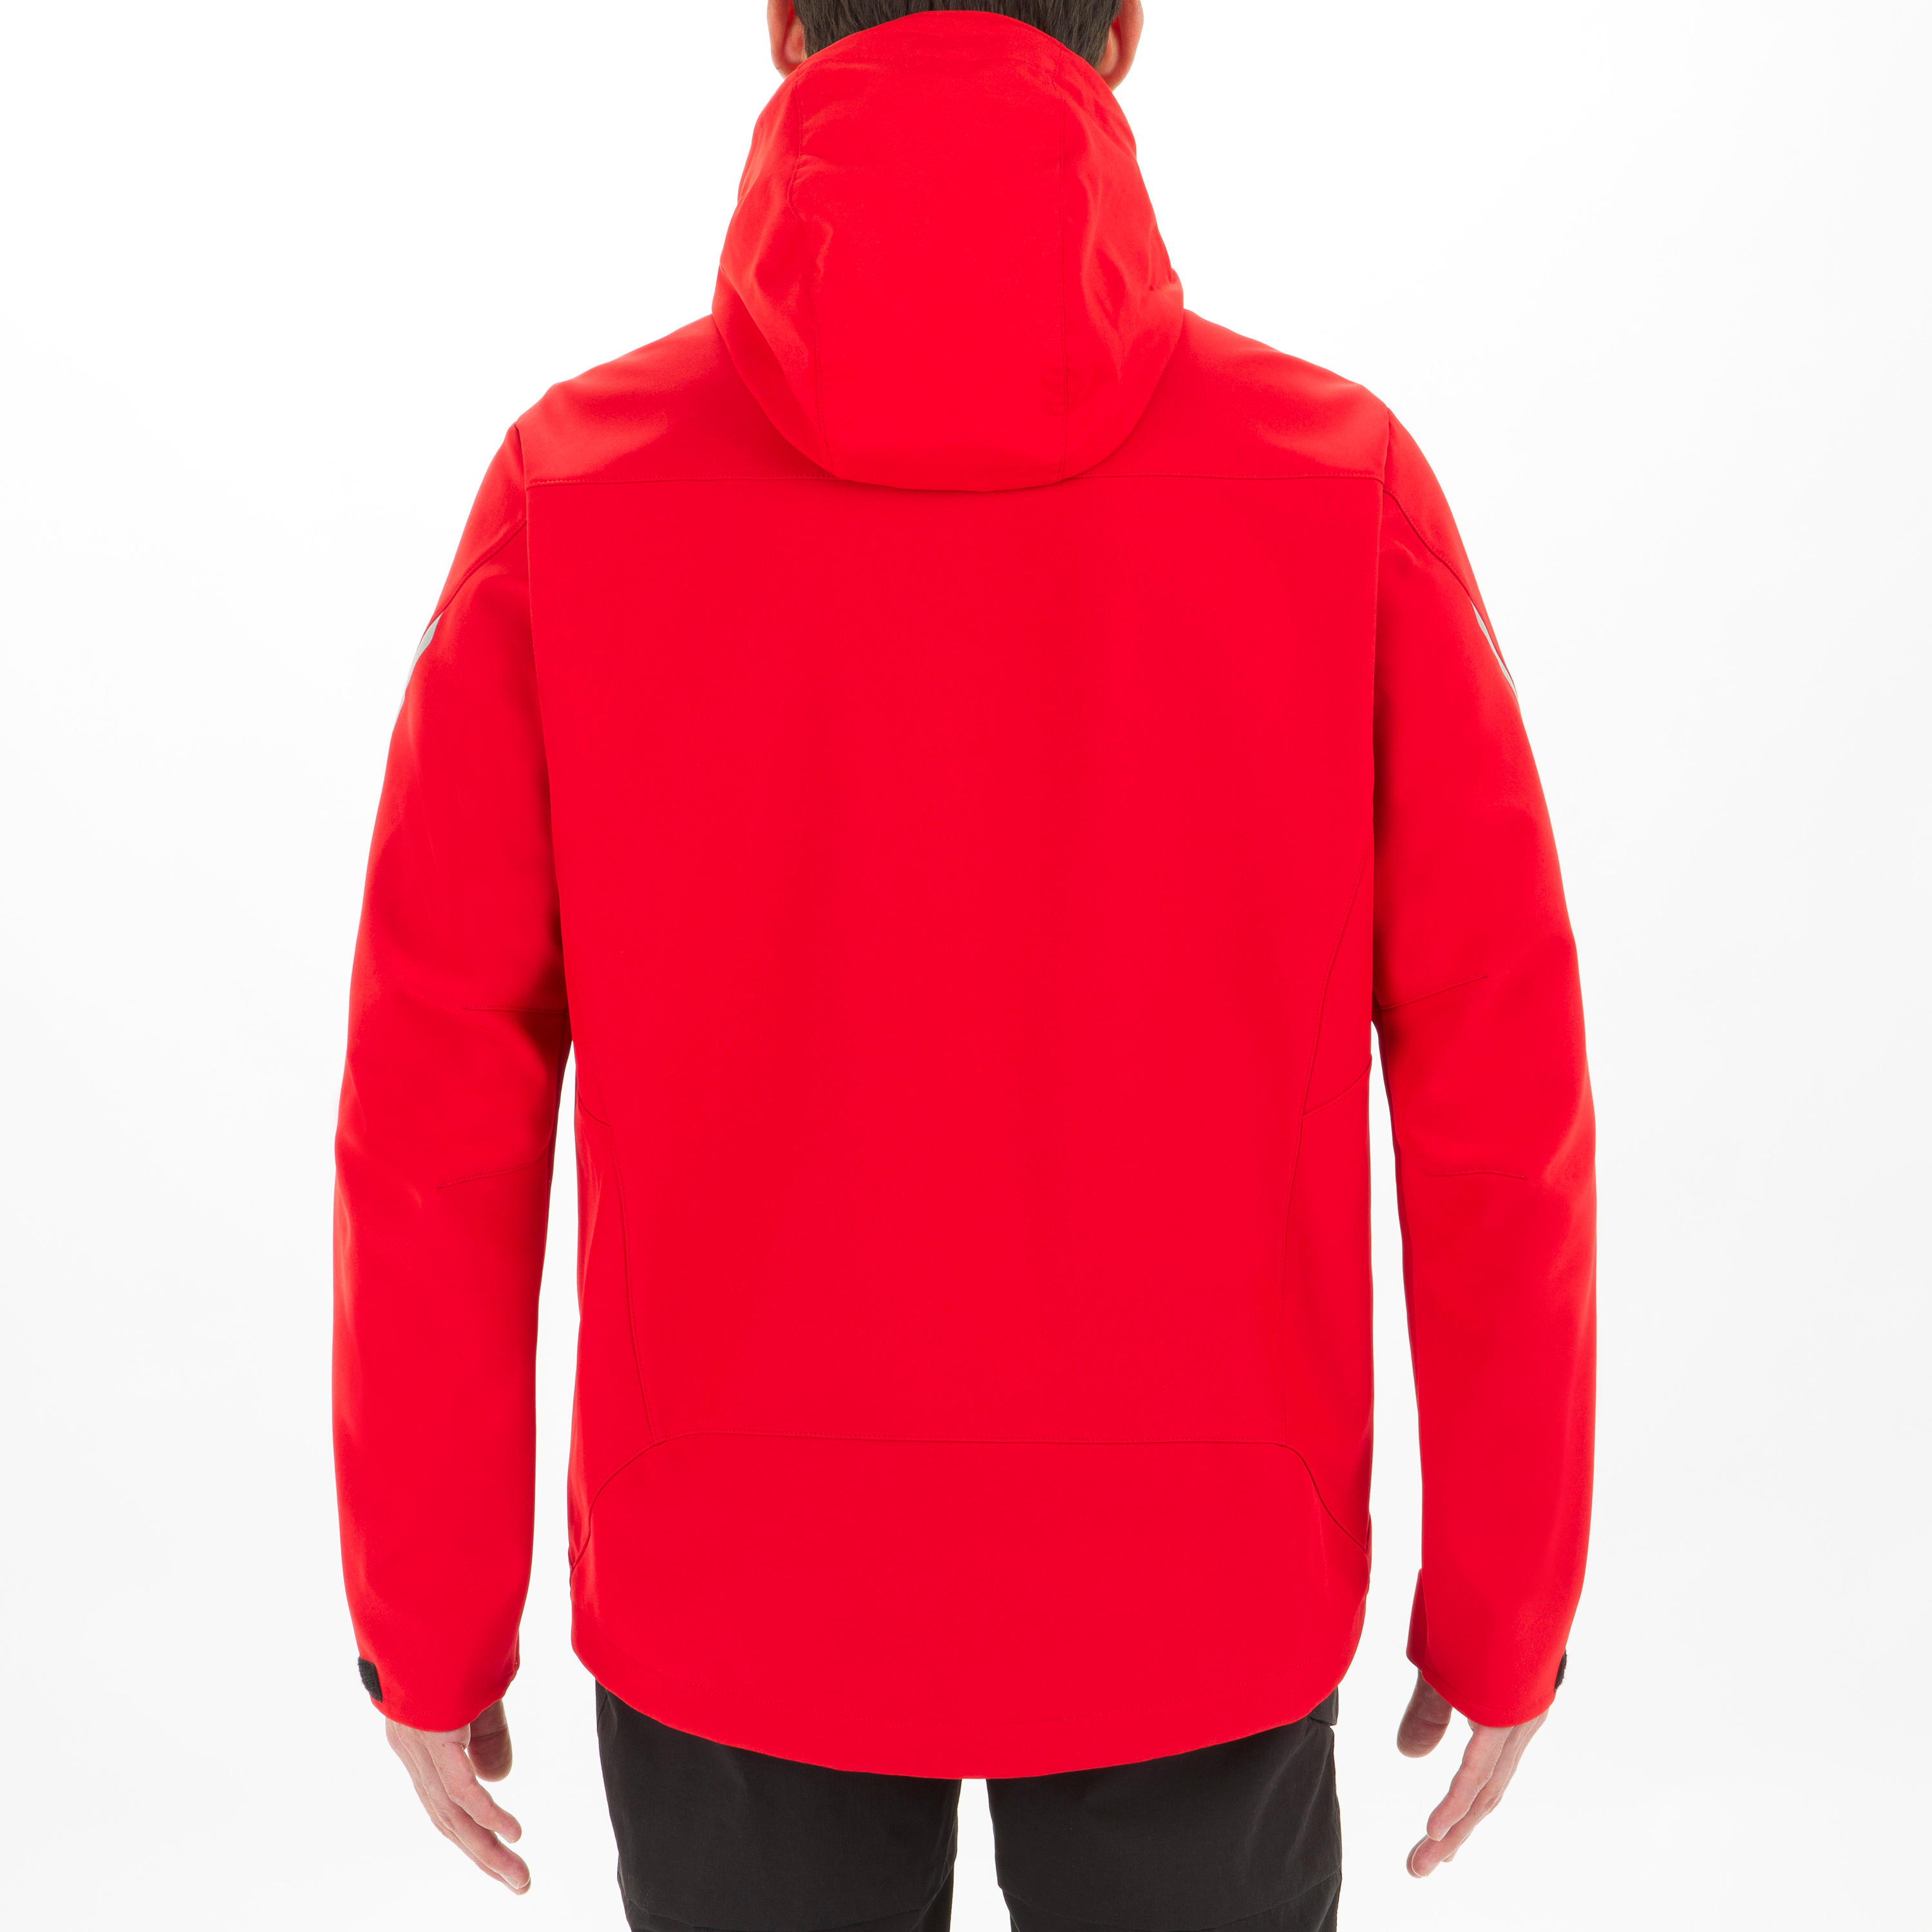 Men’s Sailing windproof Softshell jacket 900 - Red 5/14